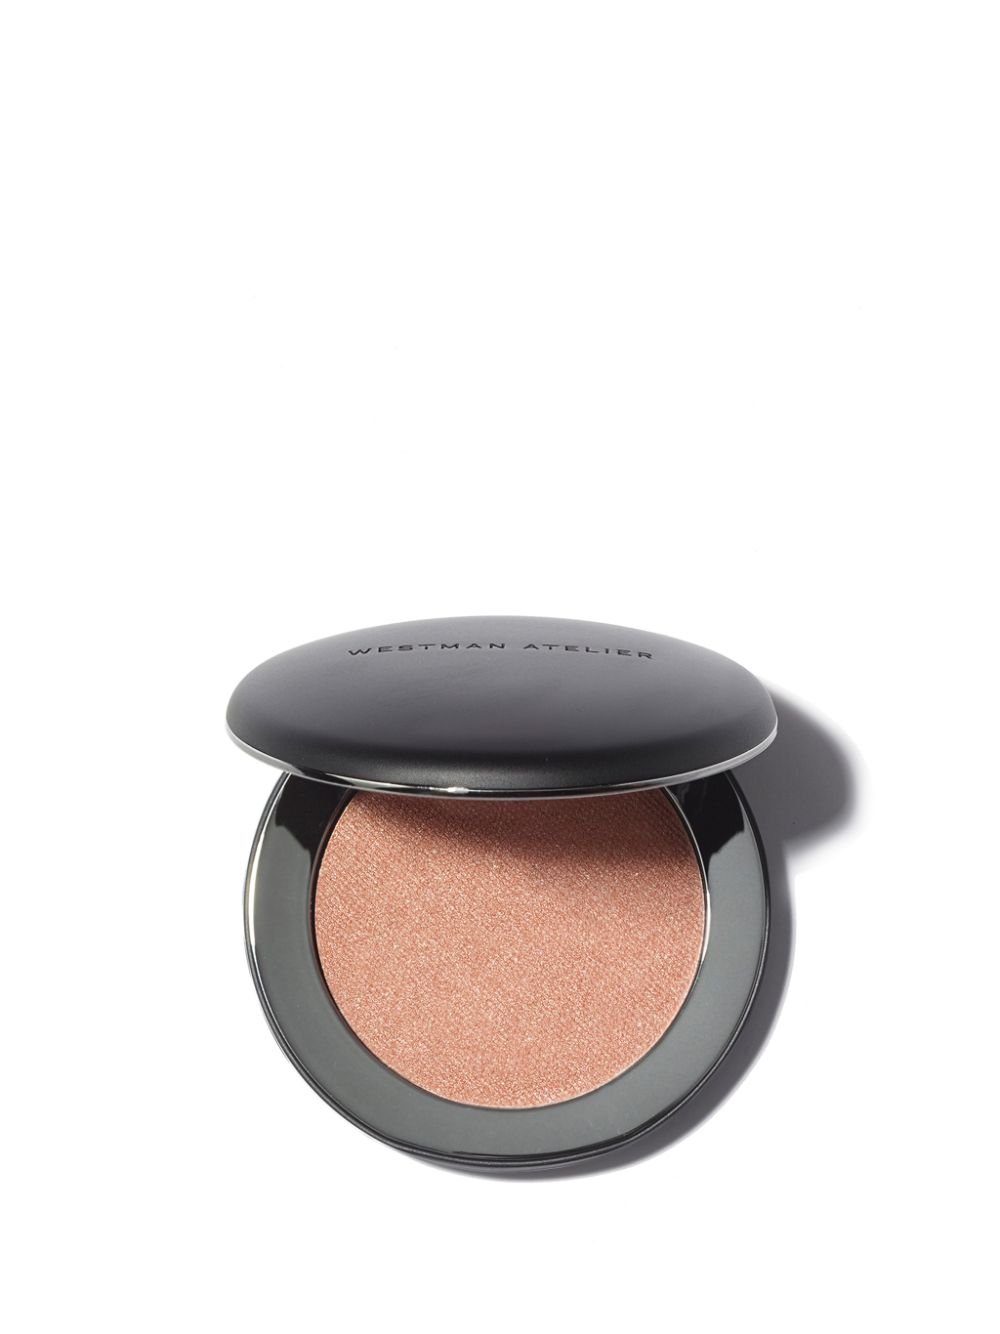 Image of <B>WESTMAN ATELIER</B><BR>SUPER LOADED TINTED HIGHLIGHT